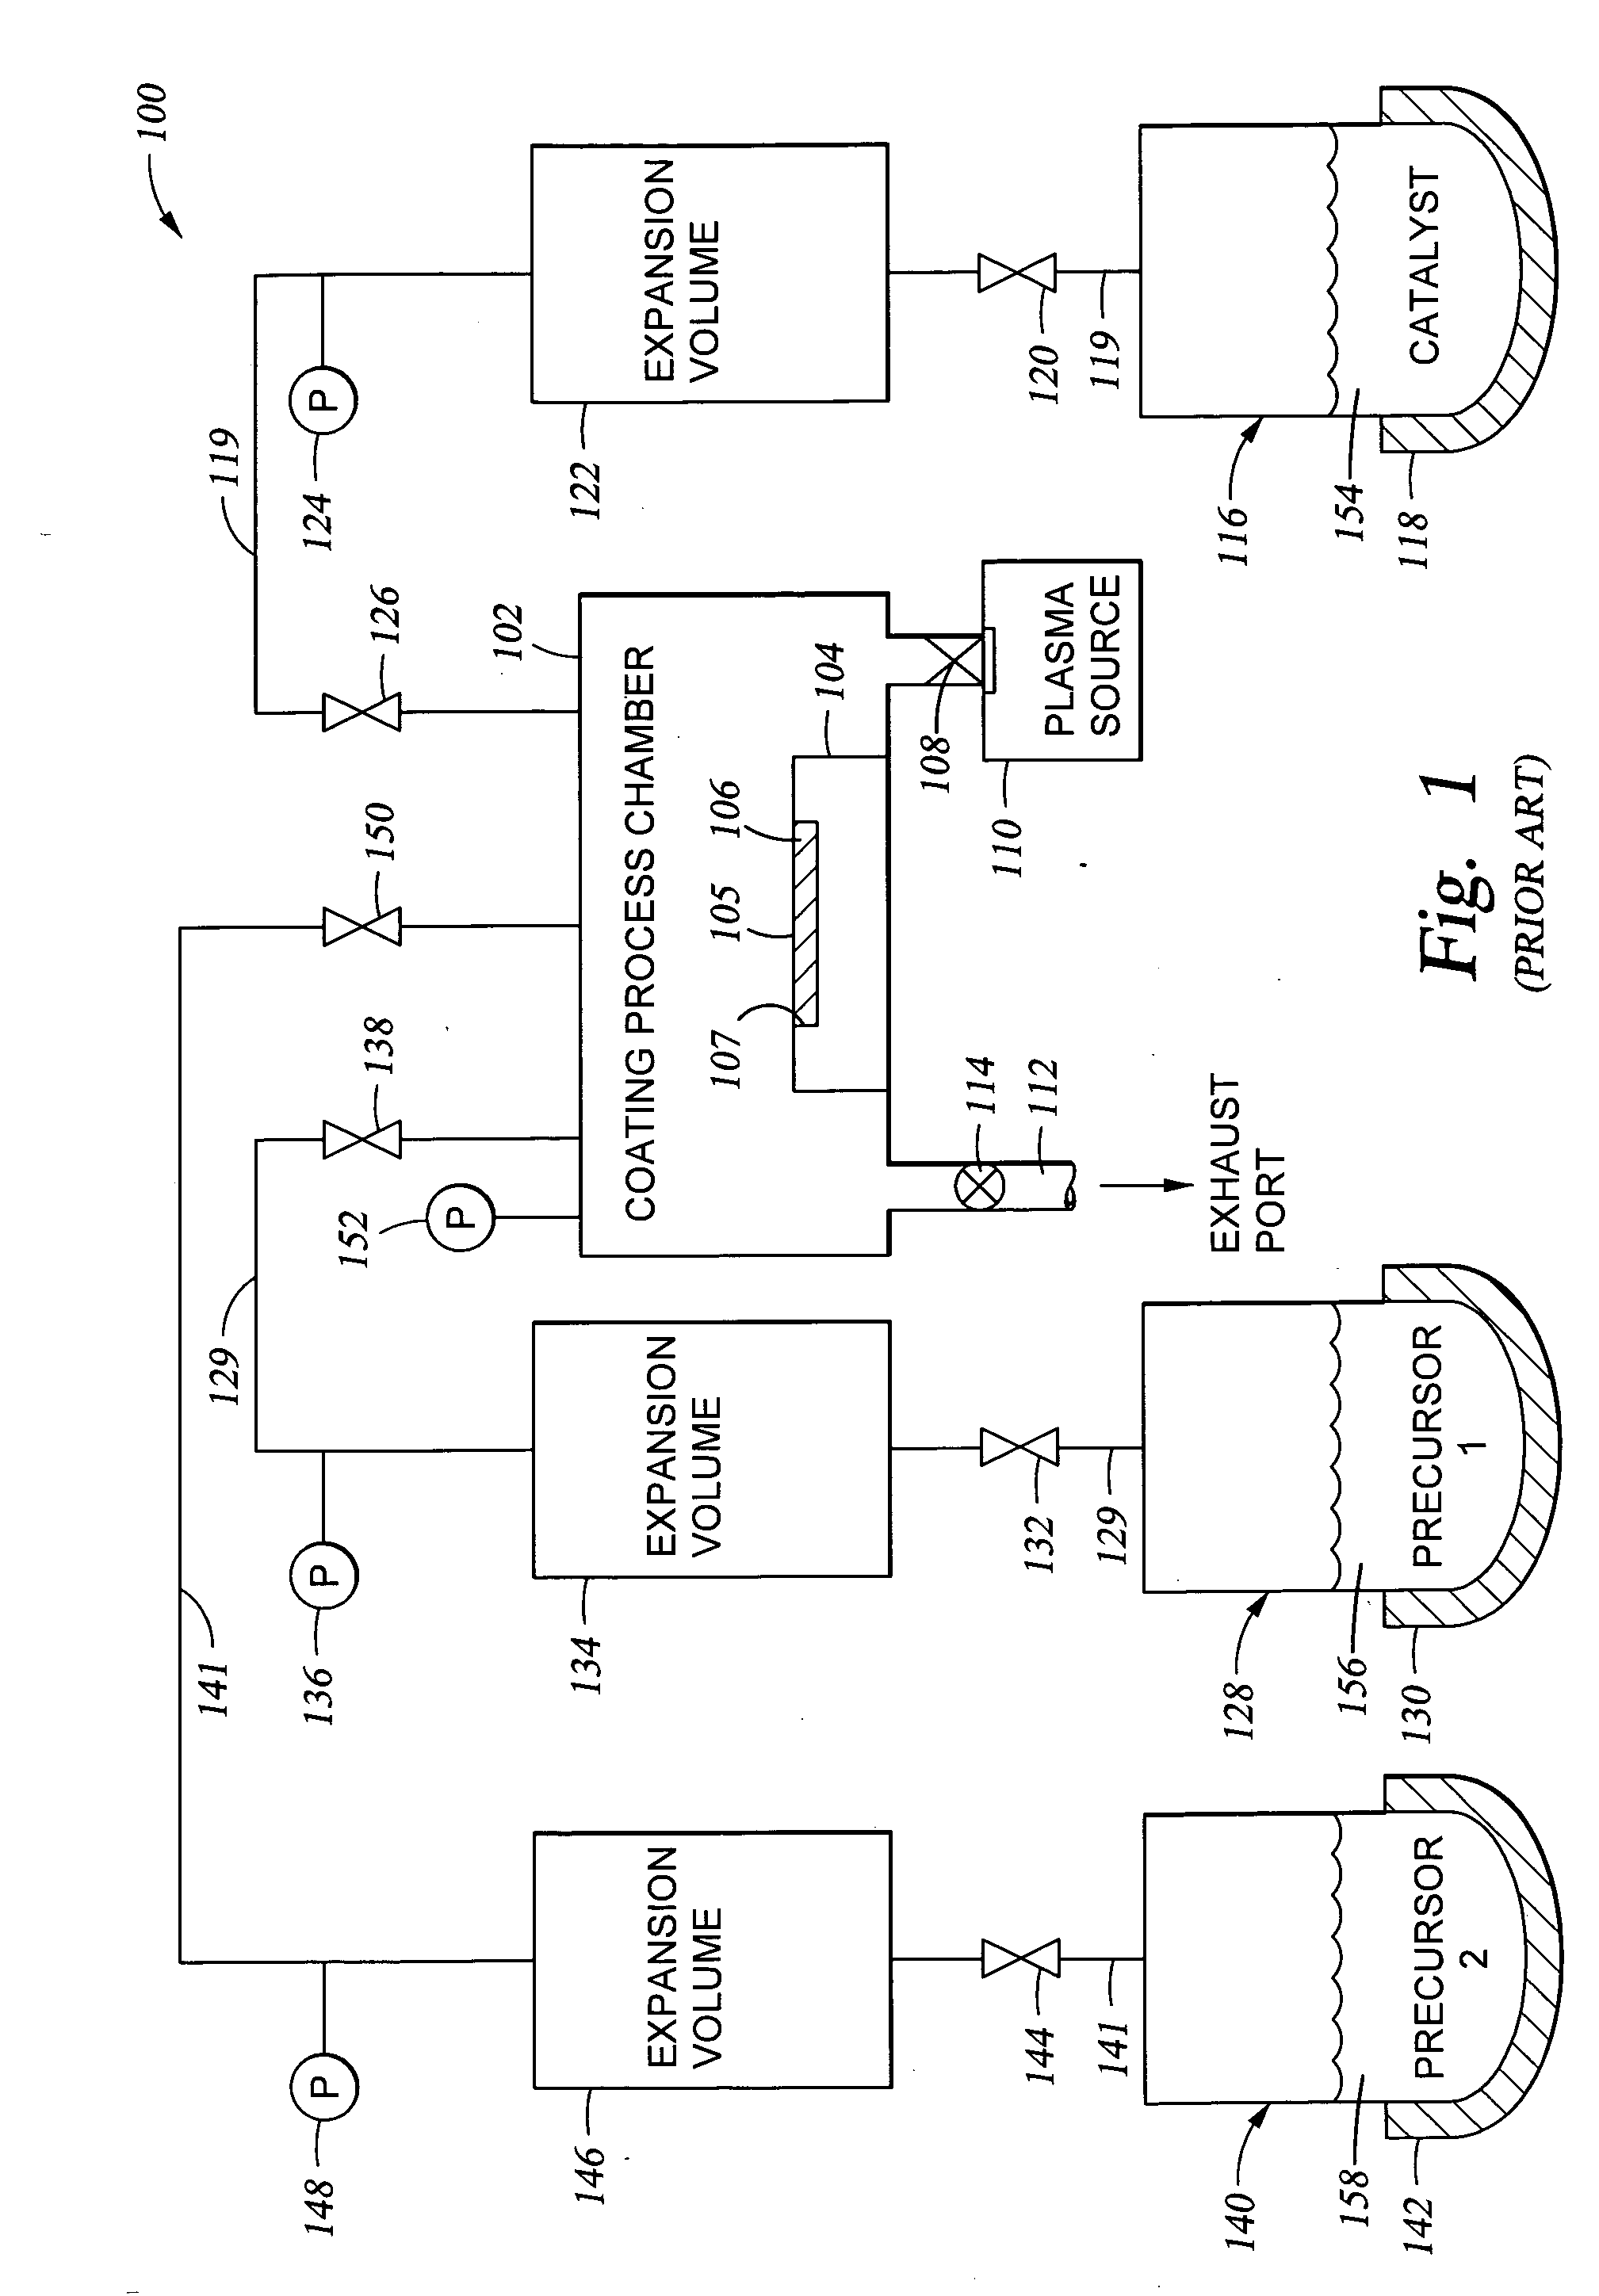 Controlled vapor deposition of multilayered coatings adhered by an oxide layer